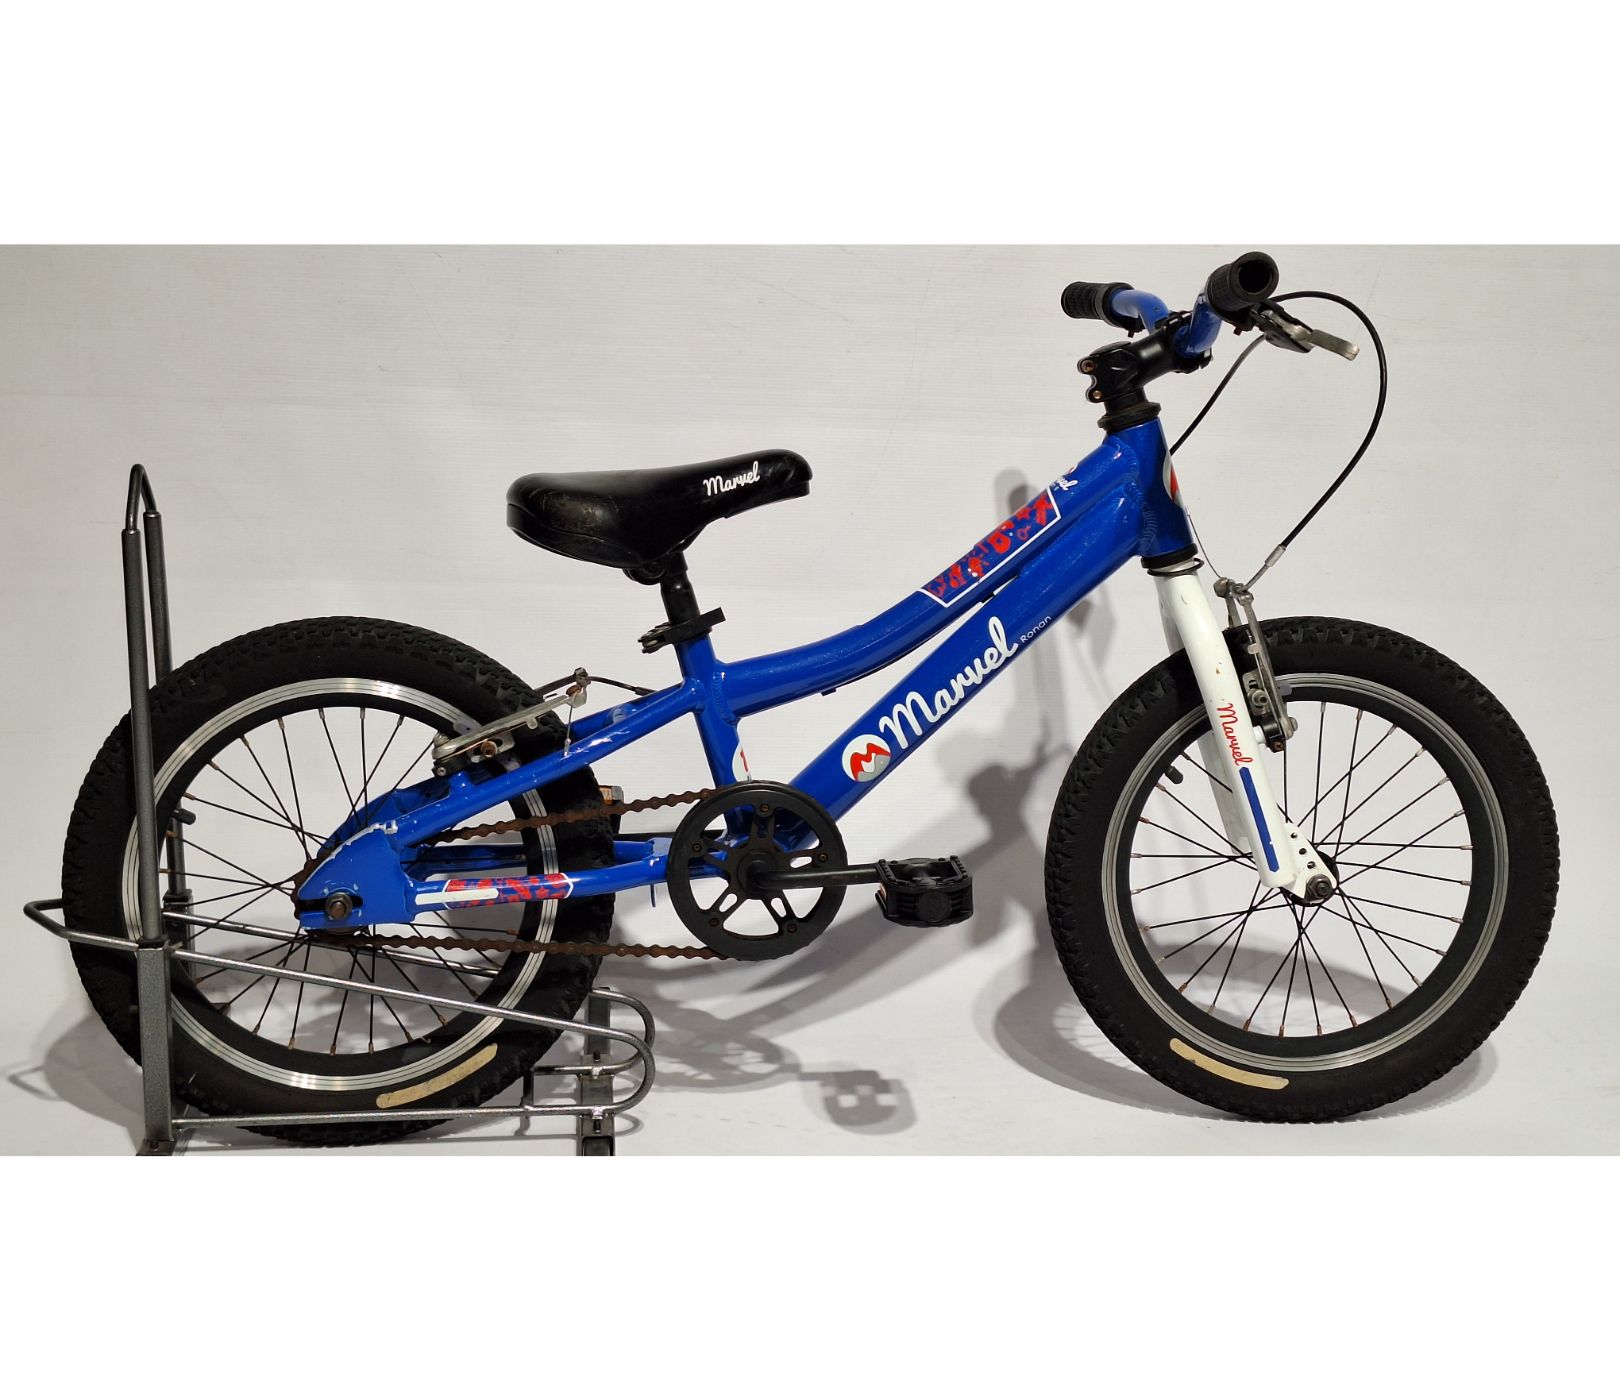 Buy Used Bikes 2nd Hand Bicycle for Sale Second Hand MTB for Sale